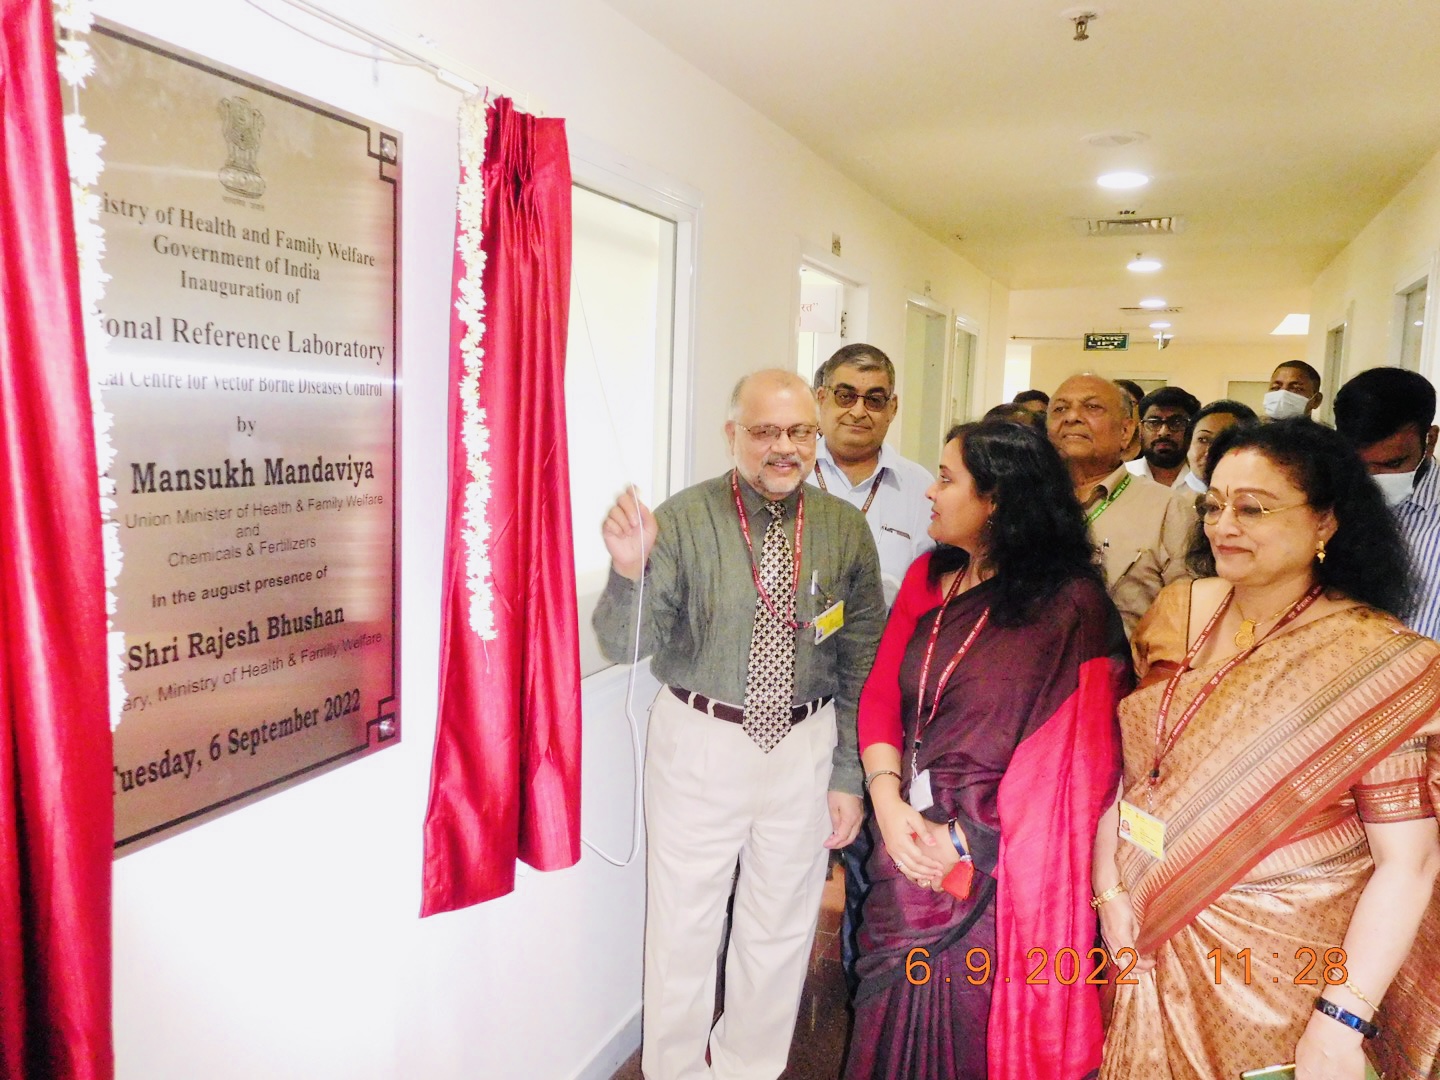 4. Inauguration of National Reference Laboratory at National Center for Vector Borne Diseases Control, Delhi on 6th September 2022